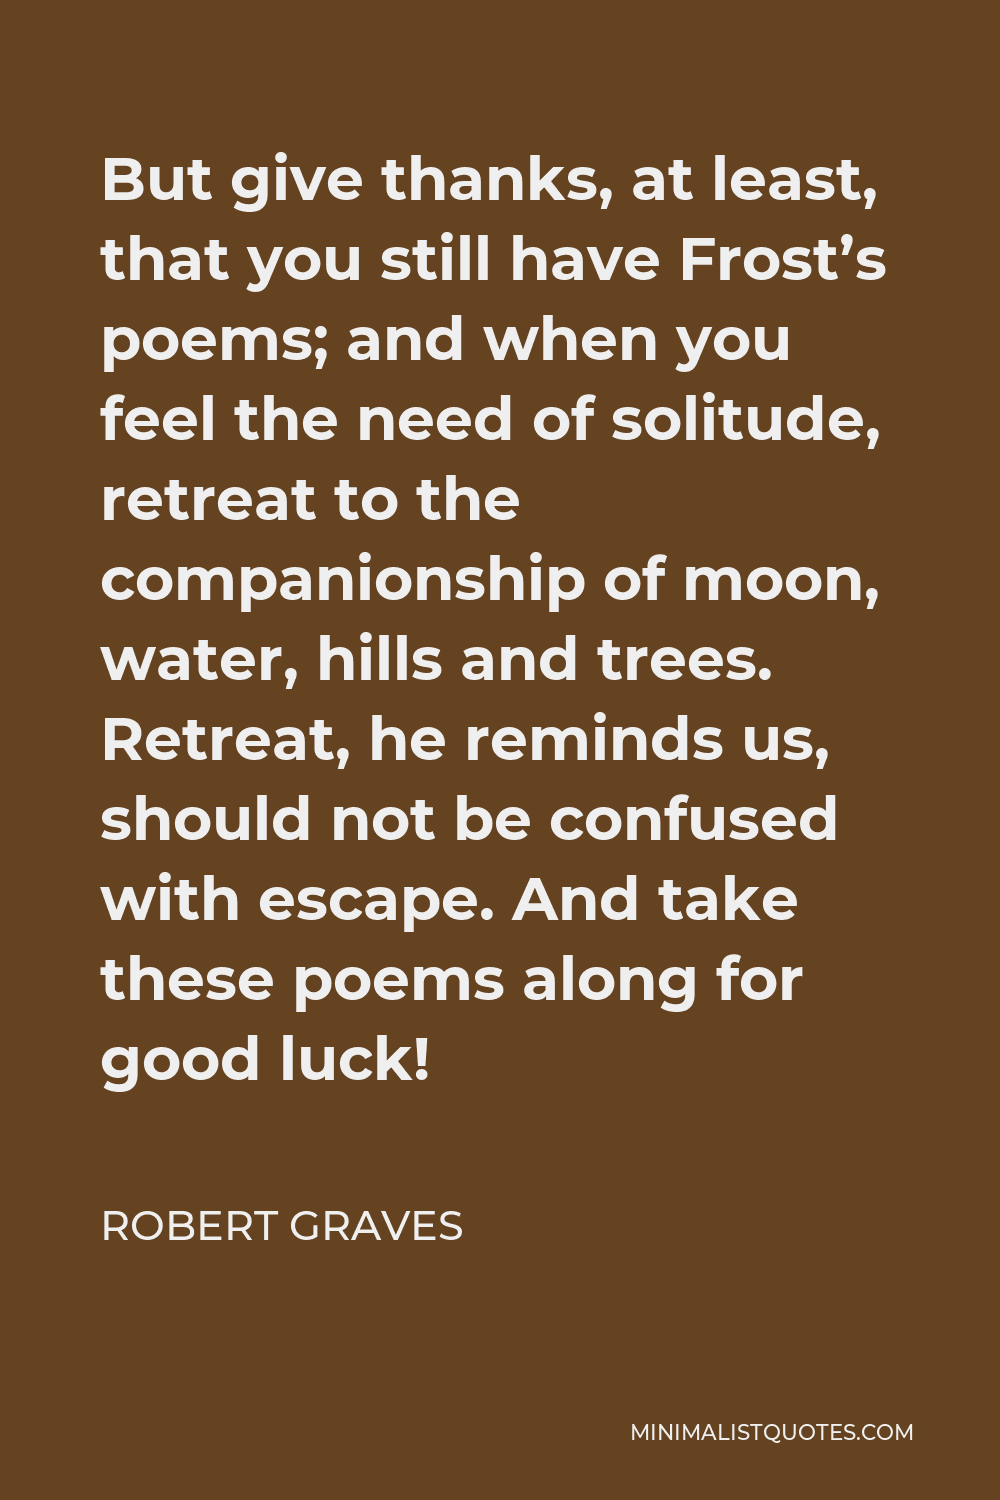 Robert Graves Quote - But give thanks, at least, that you still have Frost’s poems; and when you feel the need of solitude, retreat to the companionship of moon, water, hills and trees. Retreat, he reminds us, should not be confused with escape. And take these poems along for good luck!